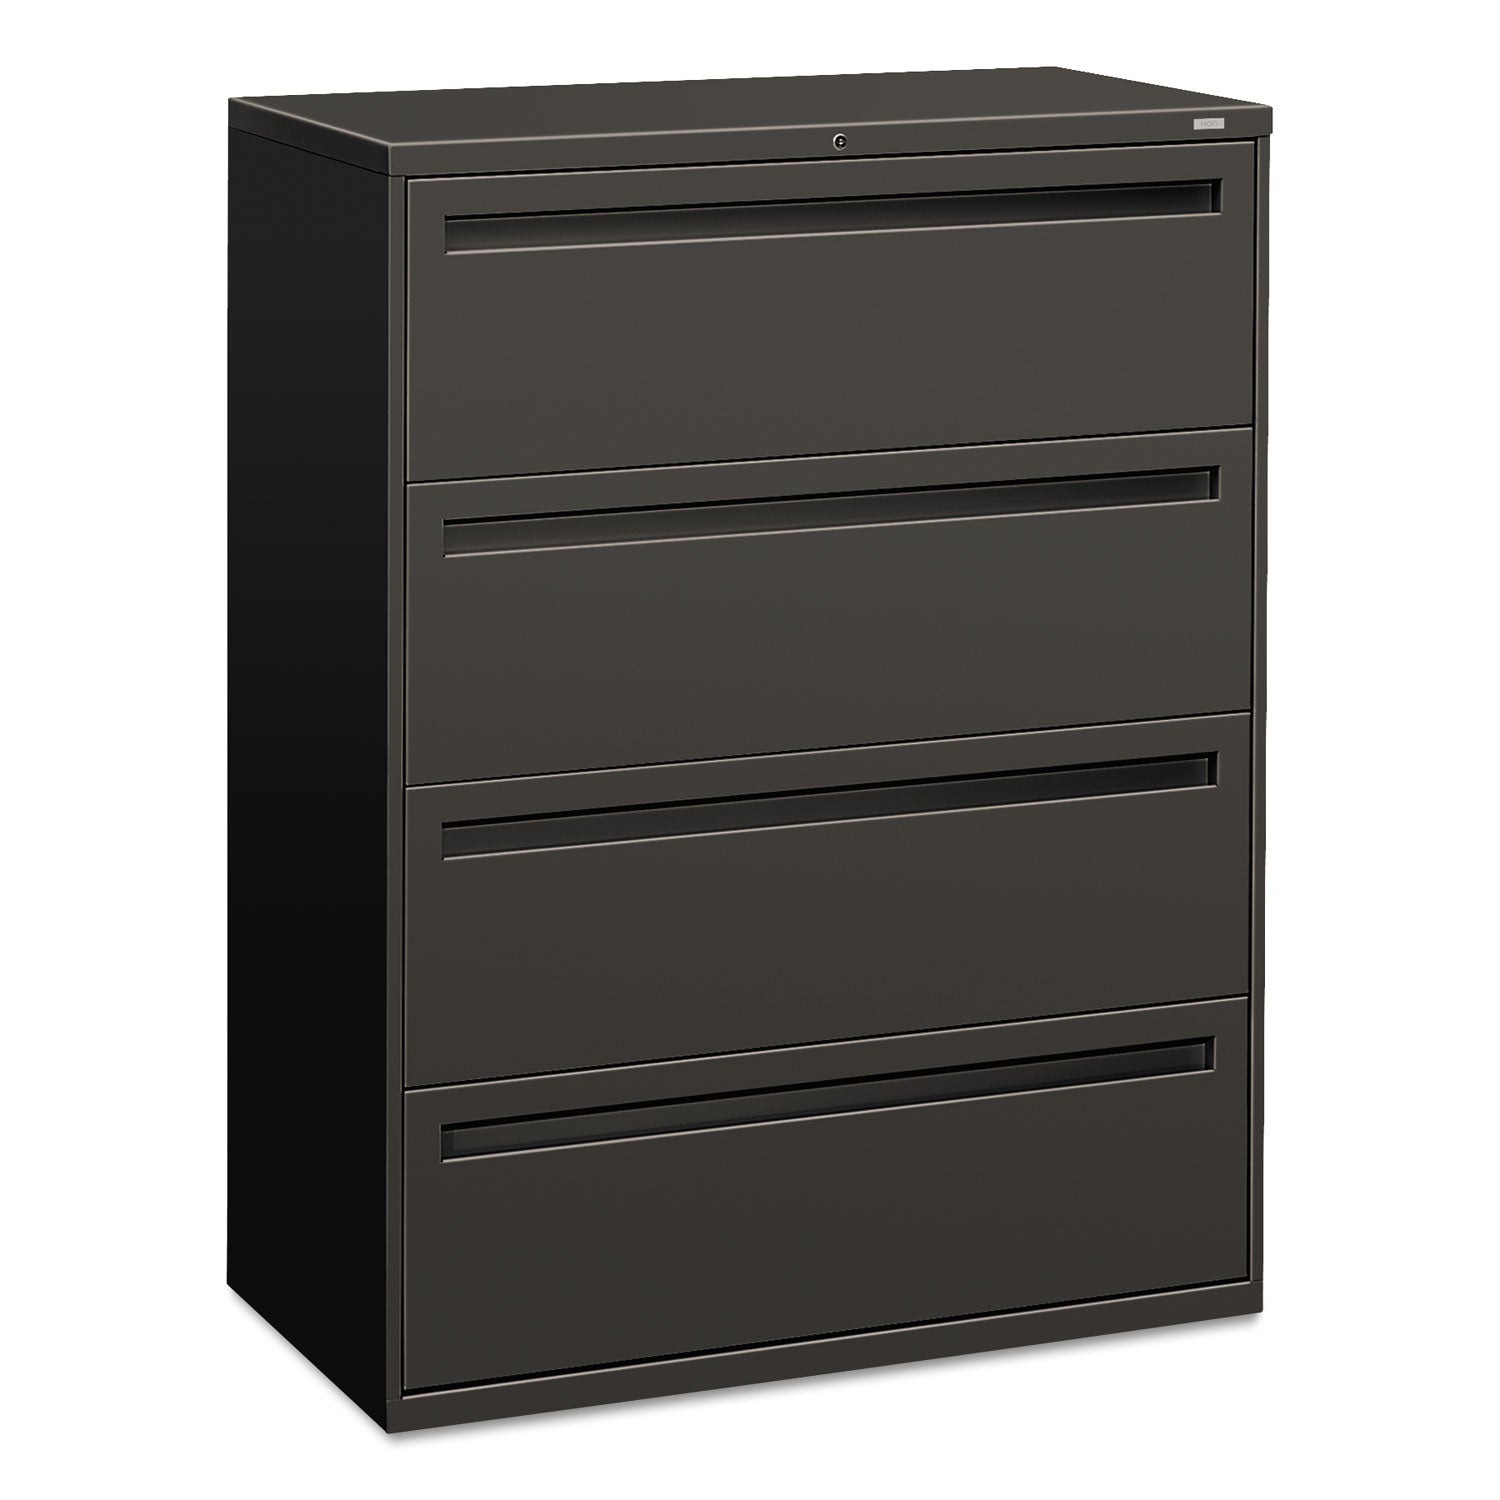 Brigade 700 Series Lateral File, 4 Legal/Letter-Size File Drawers, Charcoal, 42" x 18" x 52.5 - 